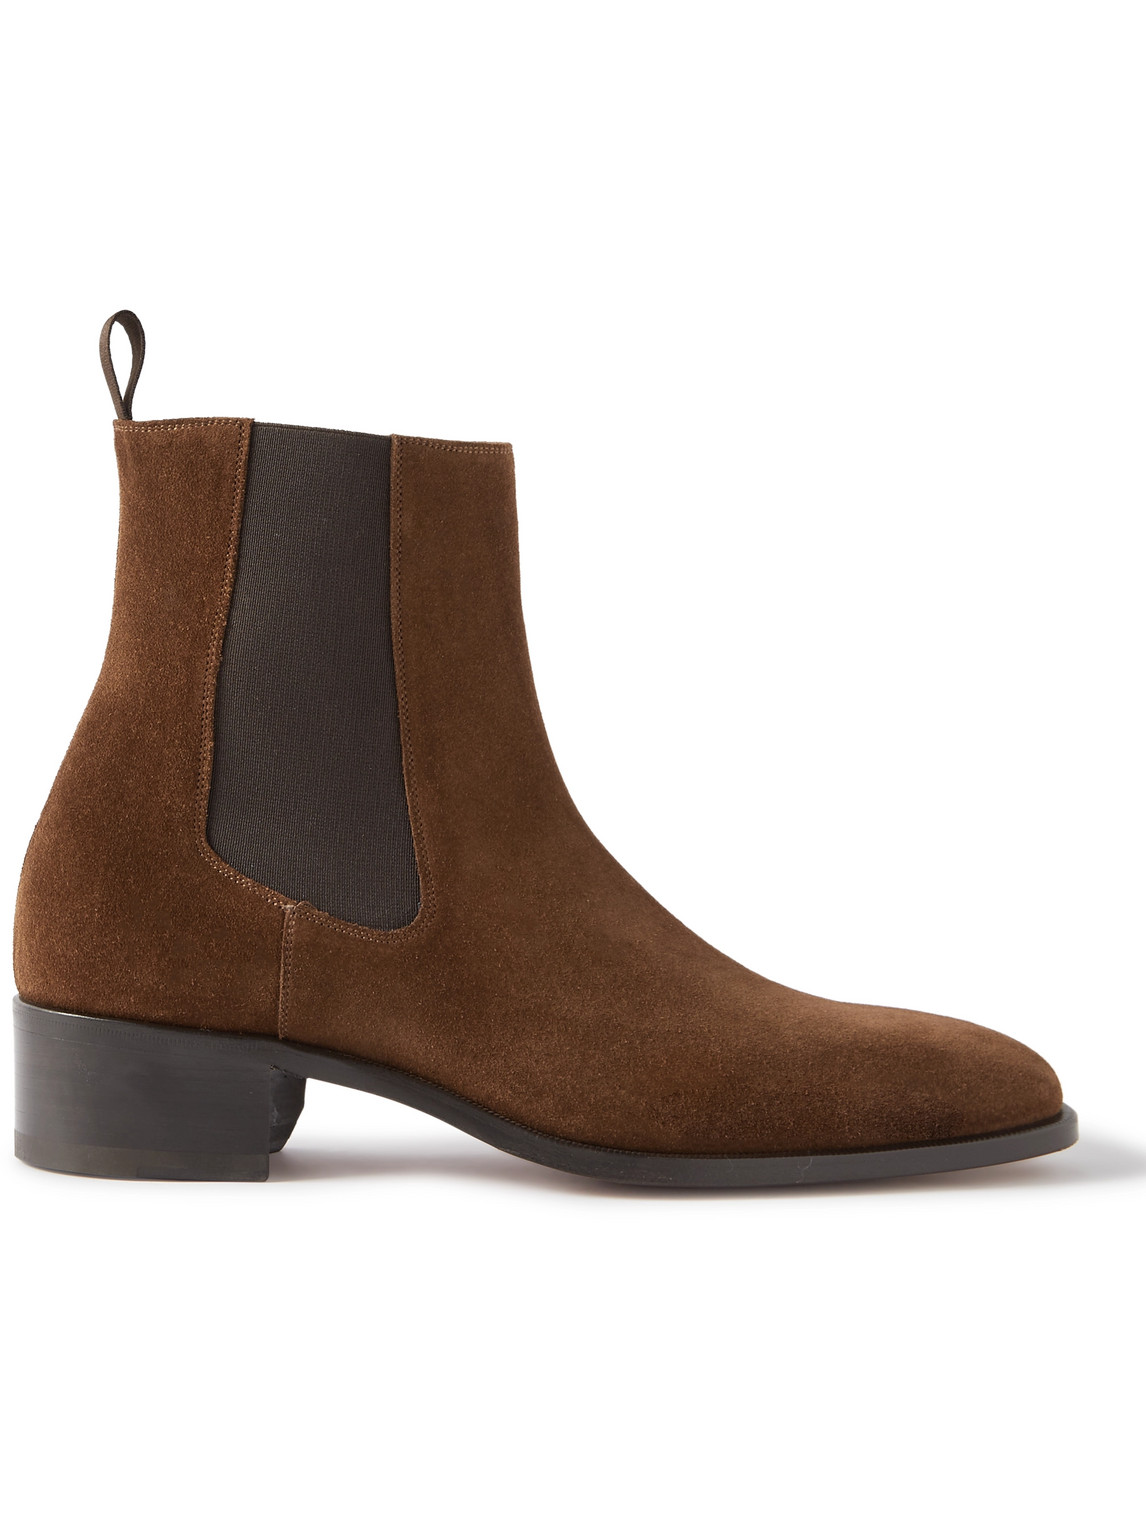 Tom Ford Alec Suede Chelsea Boots In Brown